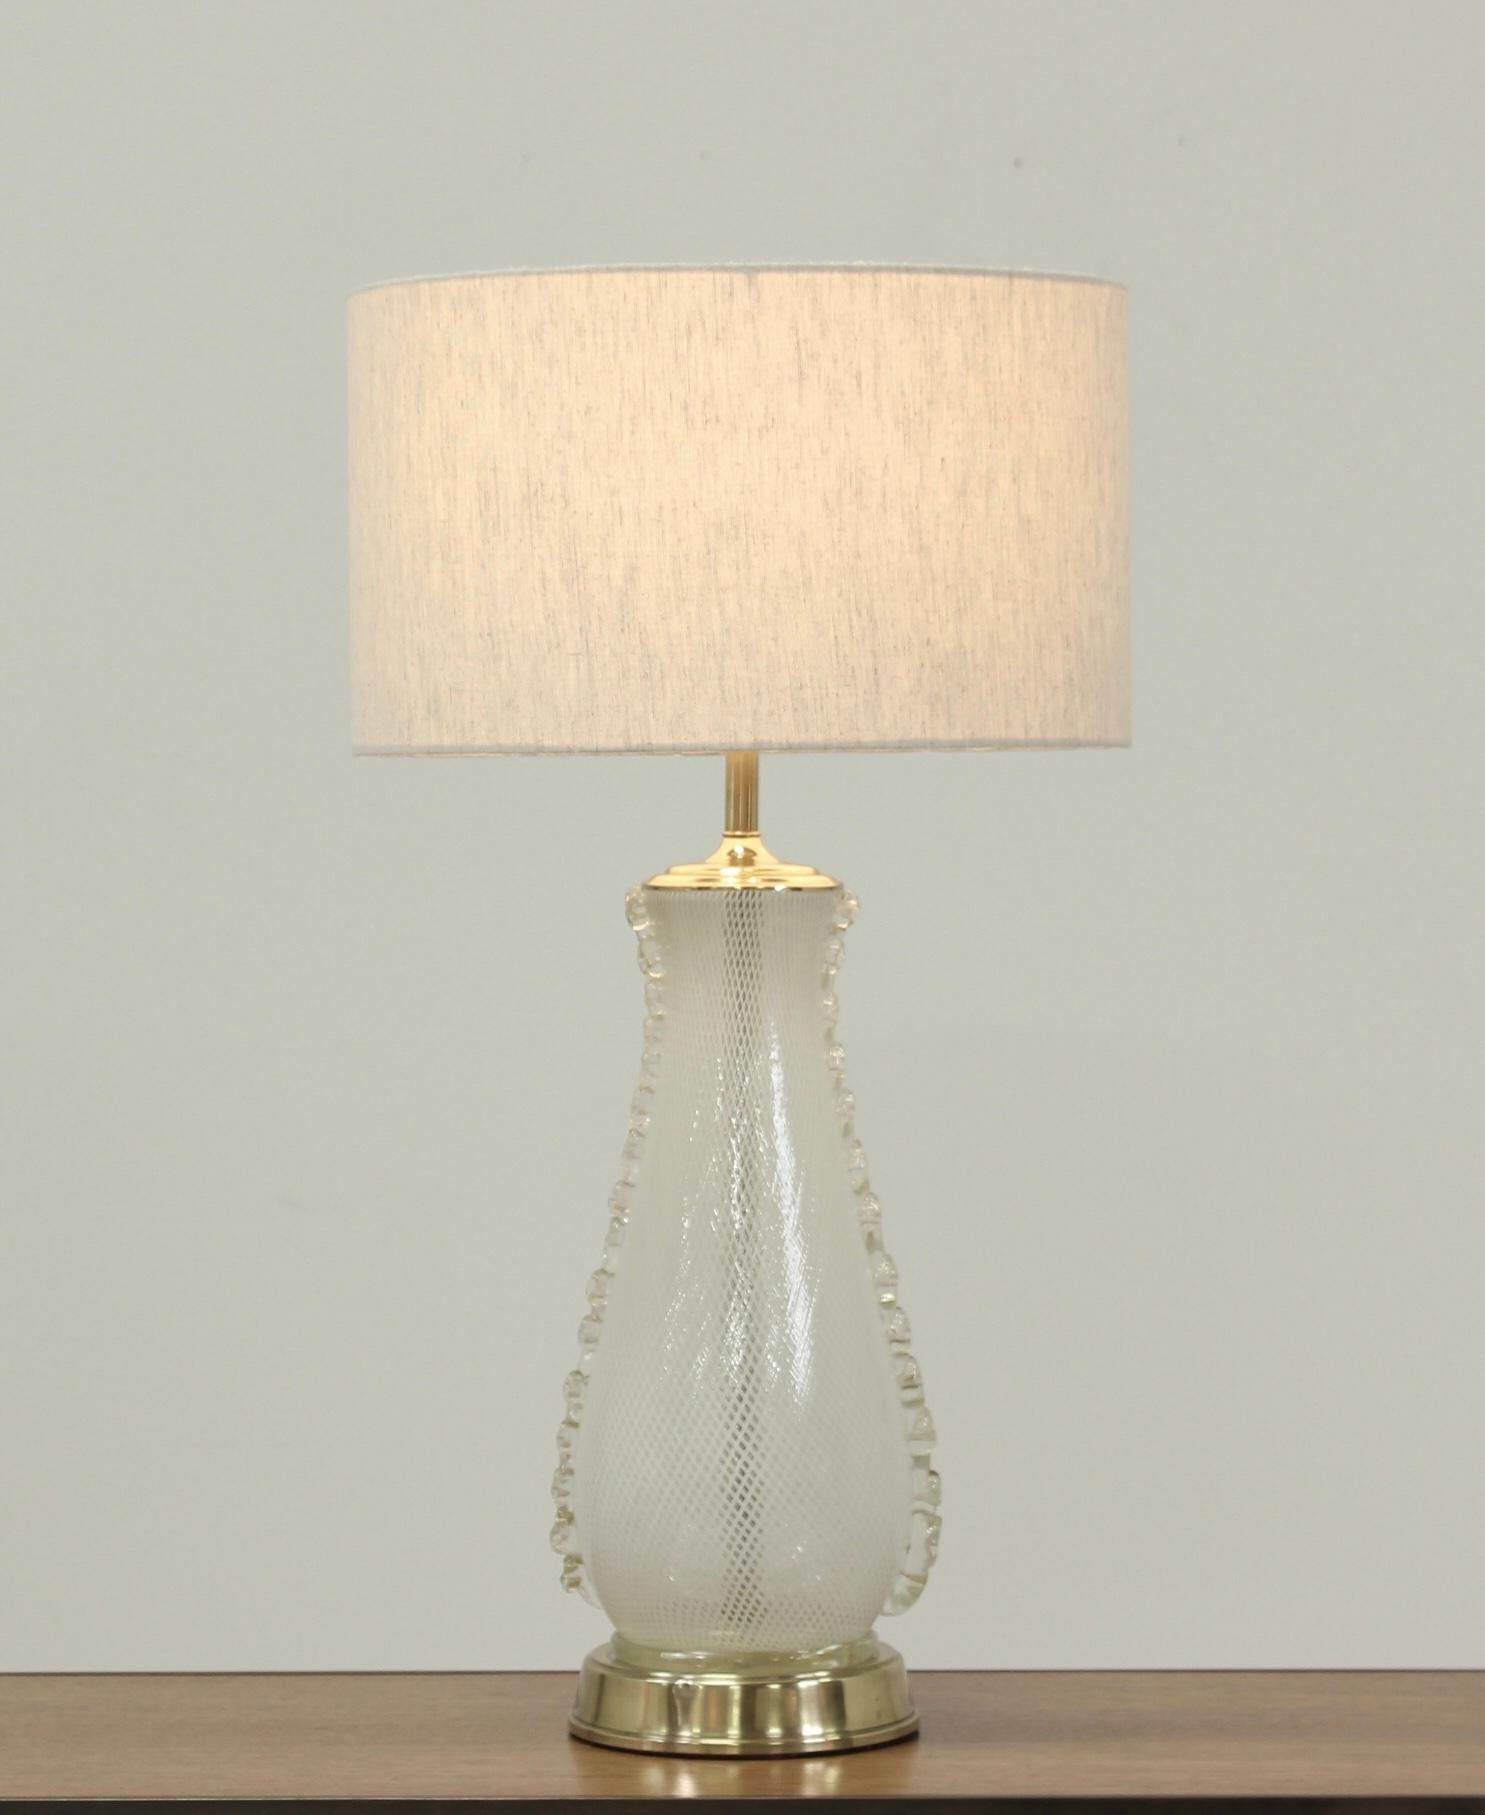 1960s Venetian “latticino” glass lamp with applied clear glass decorative handles by Camer Glass, Italy . This elegant lamp has been newly wired, it’s original brass hardware has been cleaned and polished. The lamp has been paired with one of our